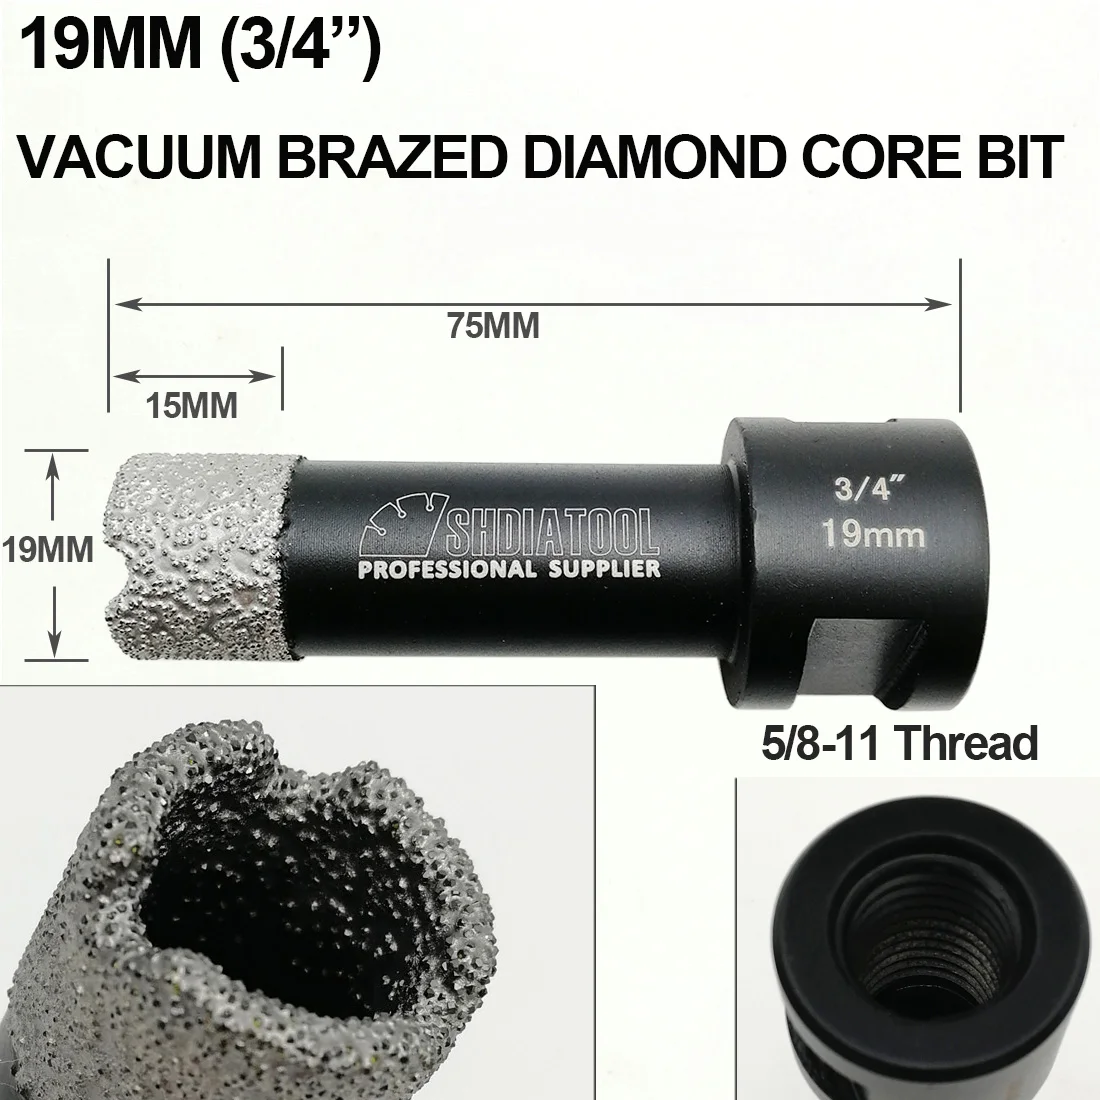 Drill bits Exquisite 1/4+3/8 SHENYUAN 2pcs/Set Vacuum brazed Diamond Dry Drilling with 5/8-11 Connection bits Diameter 6mm+10mm 